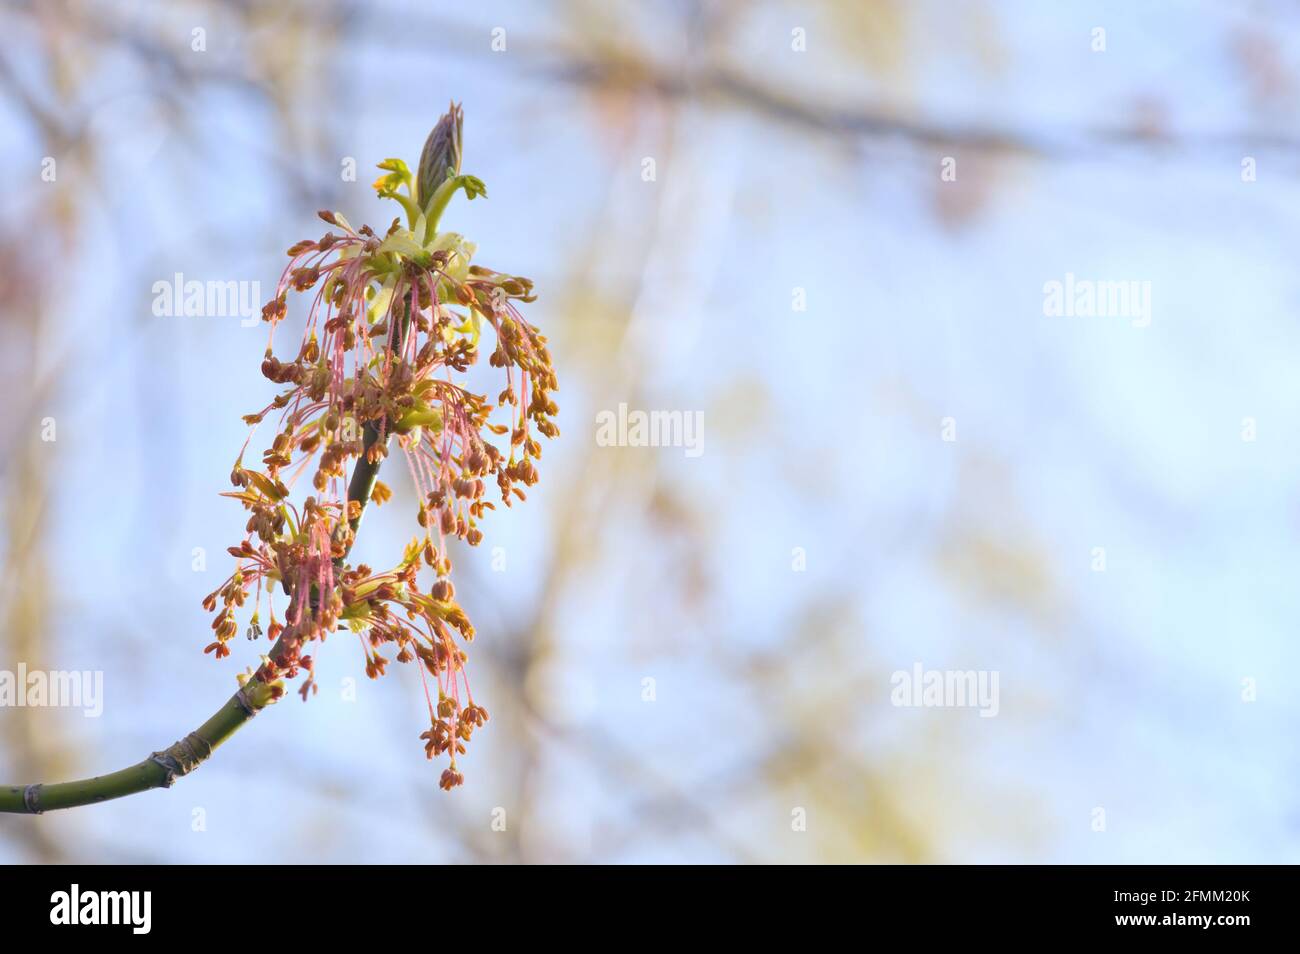 Box elder (Acer negundo) with staminate flower sprout. Selective focus and shallow  depth of field. Stock Photo